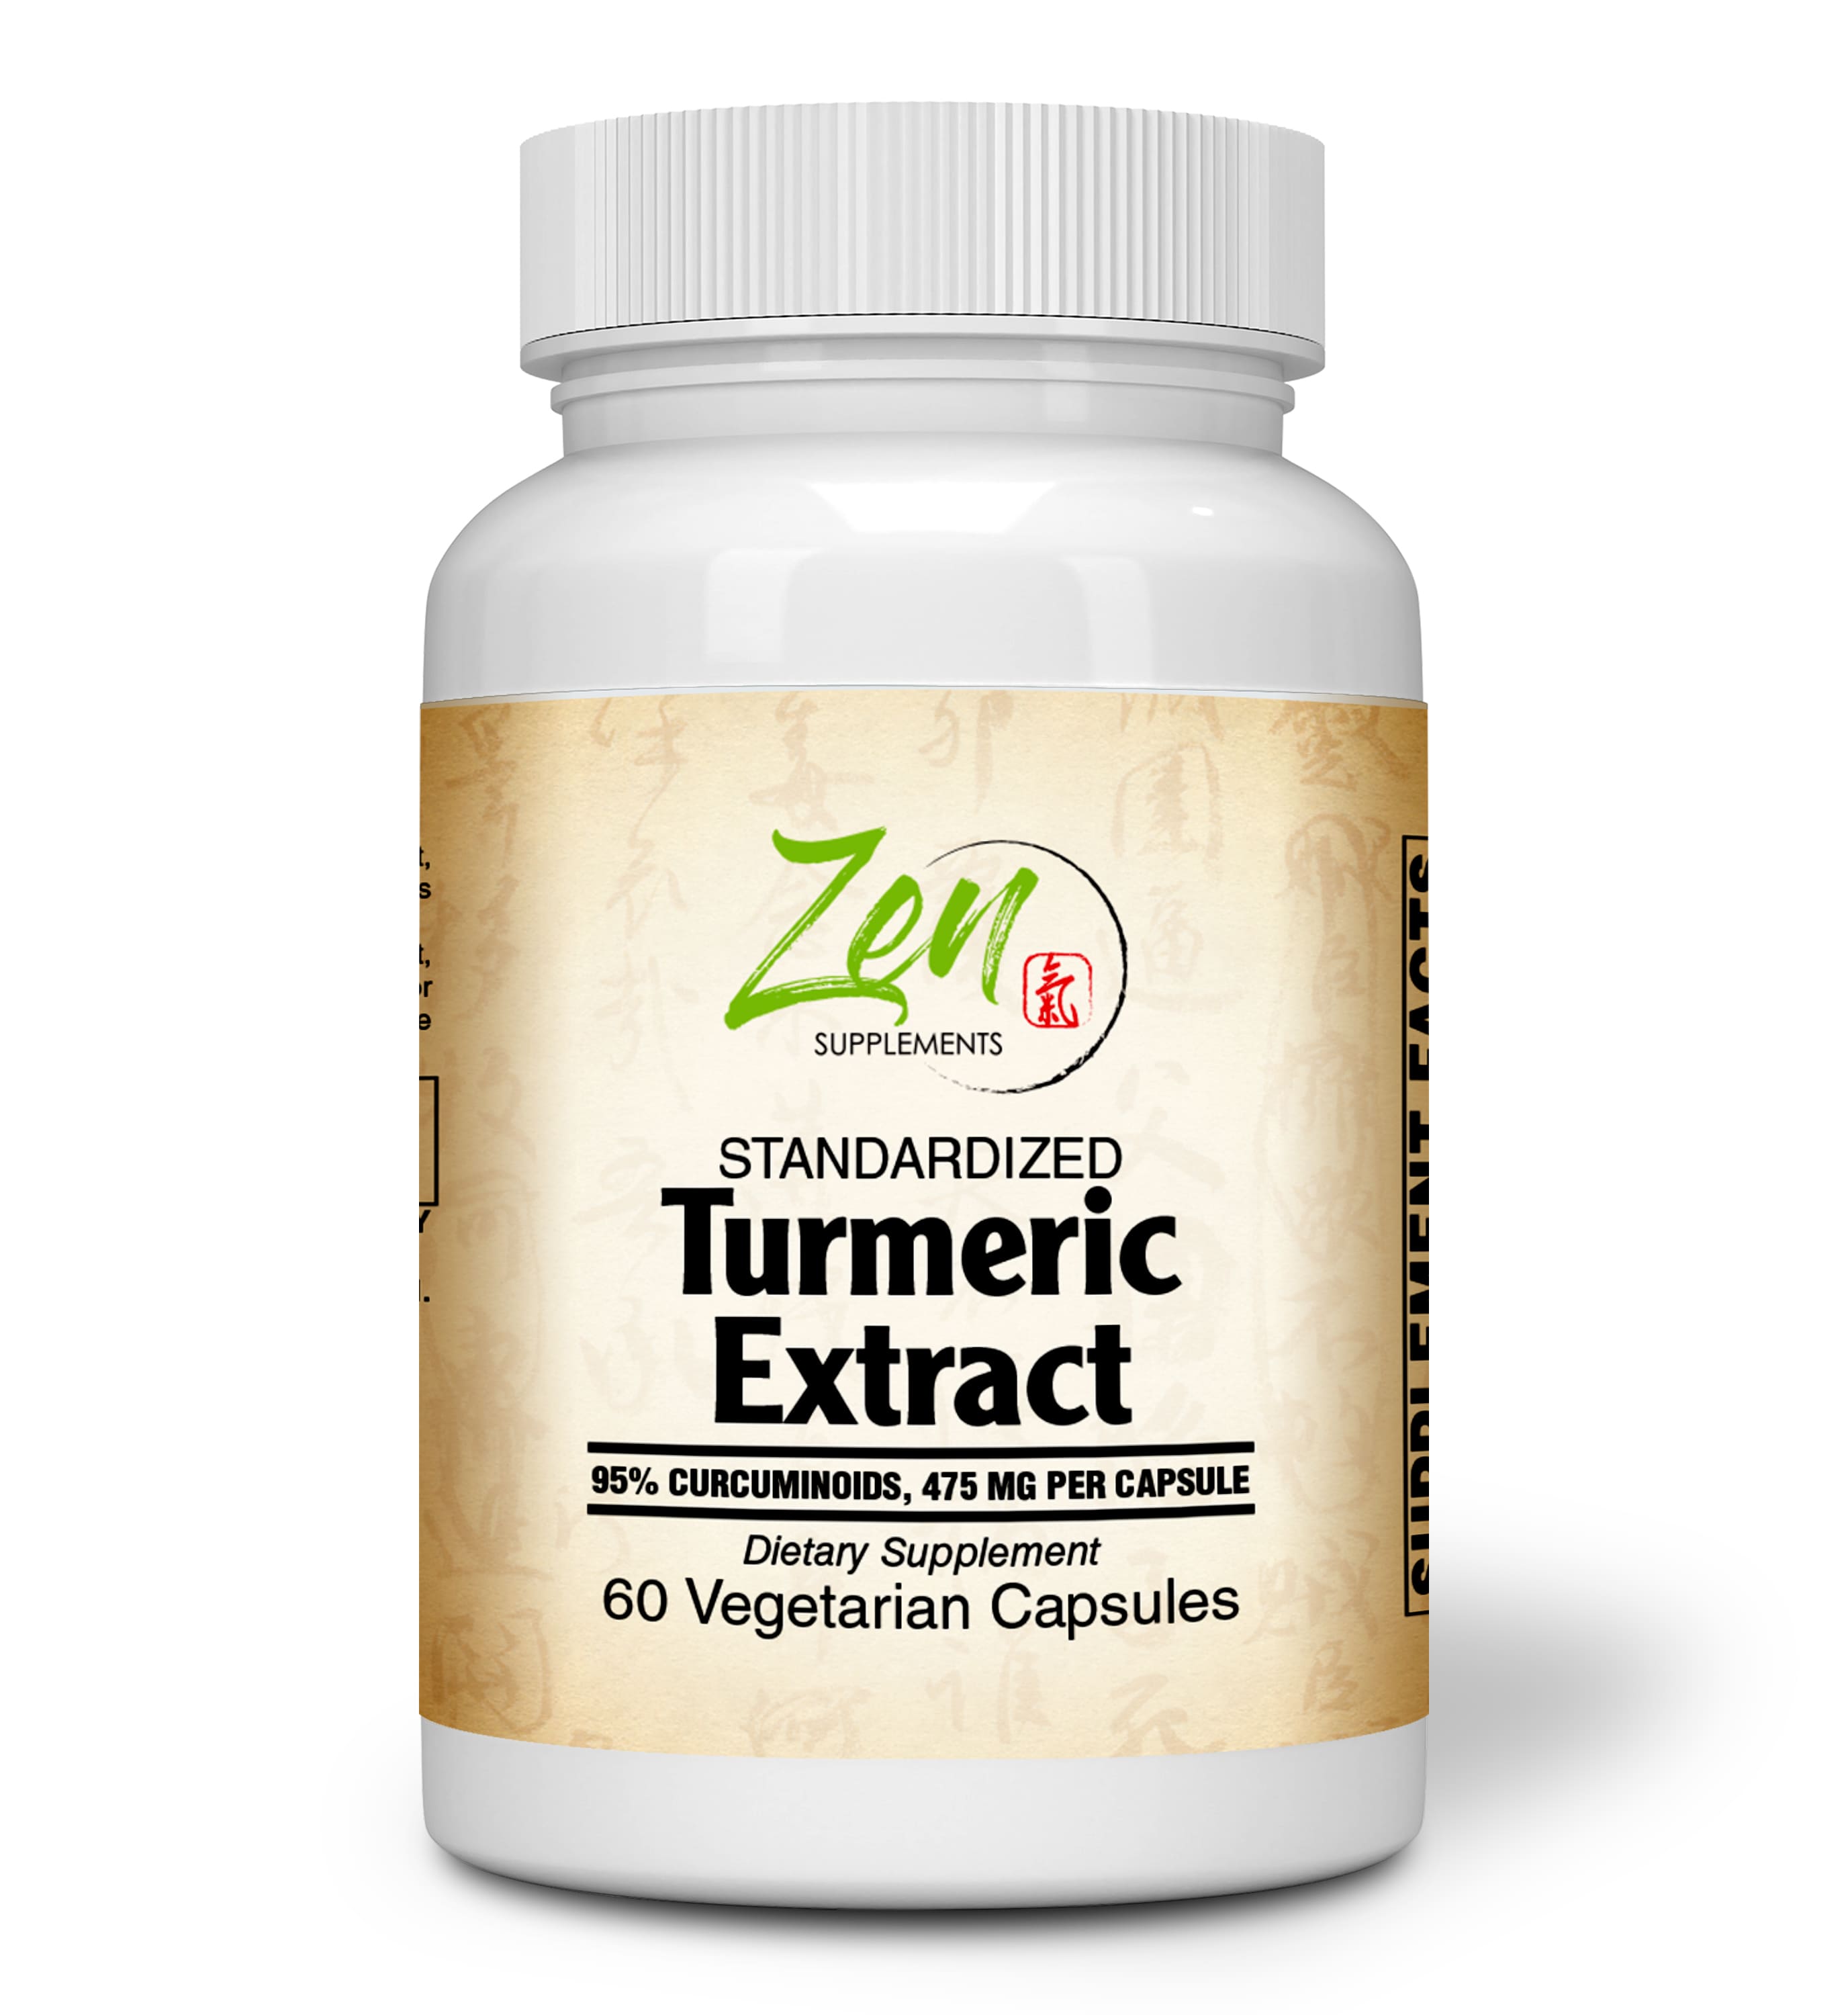 Zen Supplements - Turmeric Extract 500 Mg Features Curcumin C3 Complex® The Most Active Form of Curcuminoid Found in The Turmeric Root - Promotes Joint, Heart, Brain Health Plus Immune Response 60-Vegcaps